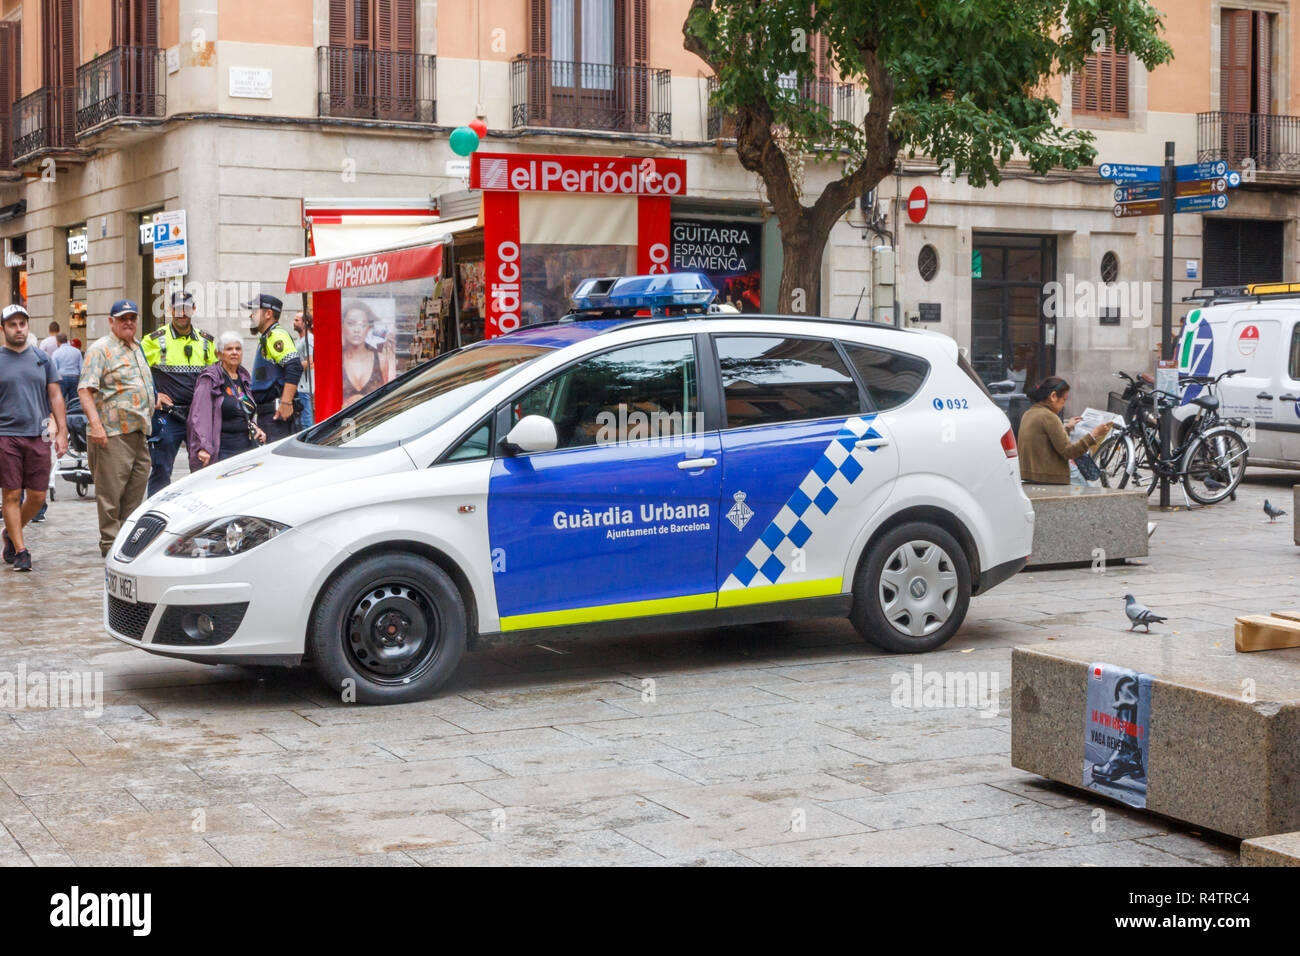 Barcelona, Spain - 4th October 2017: A police car guards a pedestrian street against terror attacks. Authorities in major cities are on high alert. Stock Photo